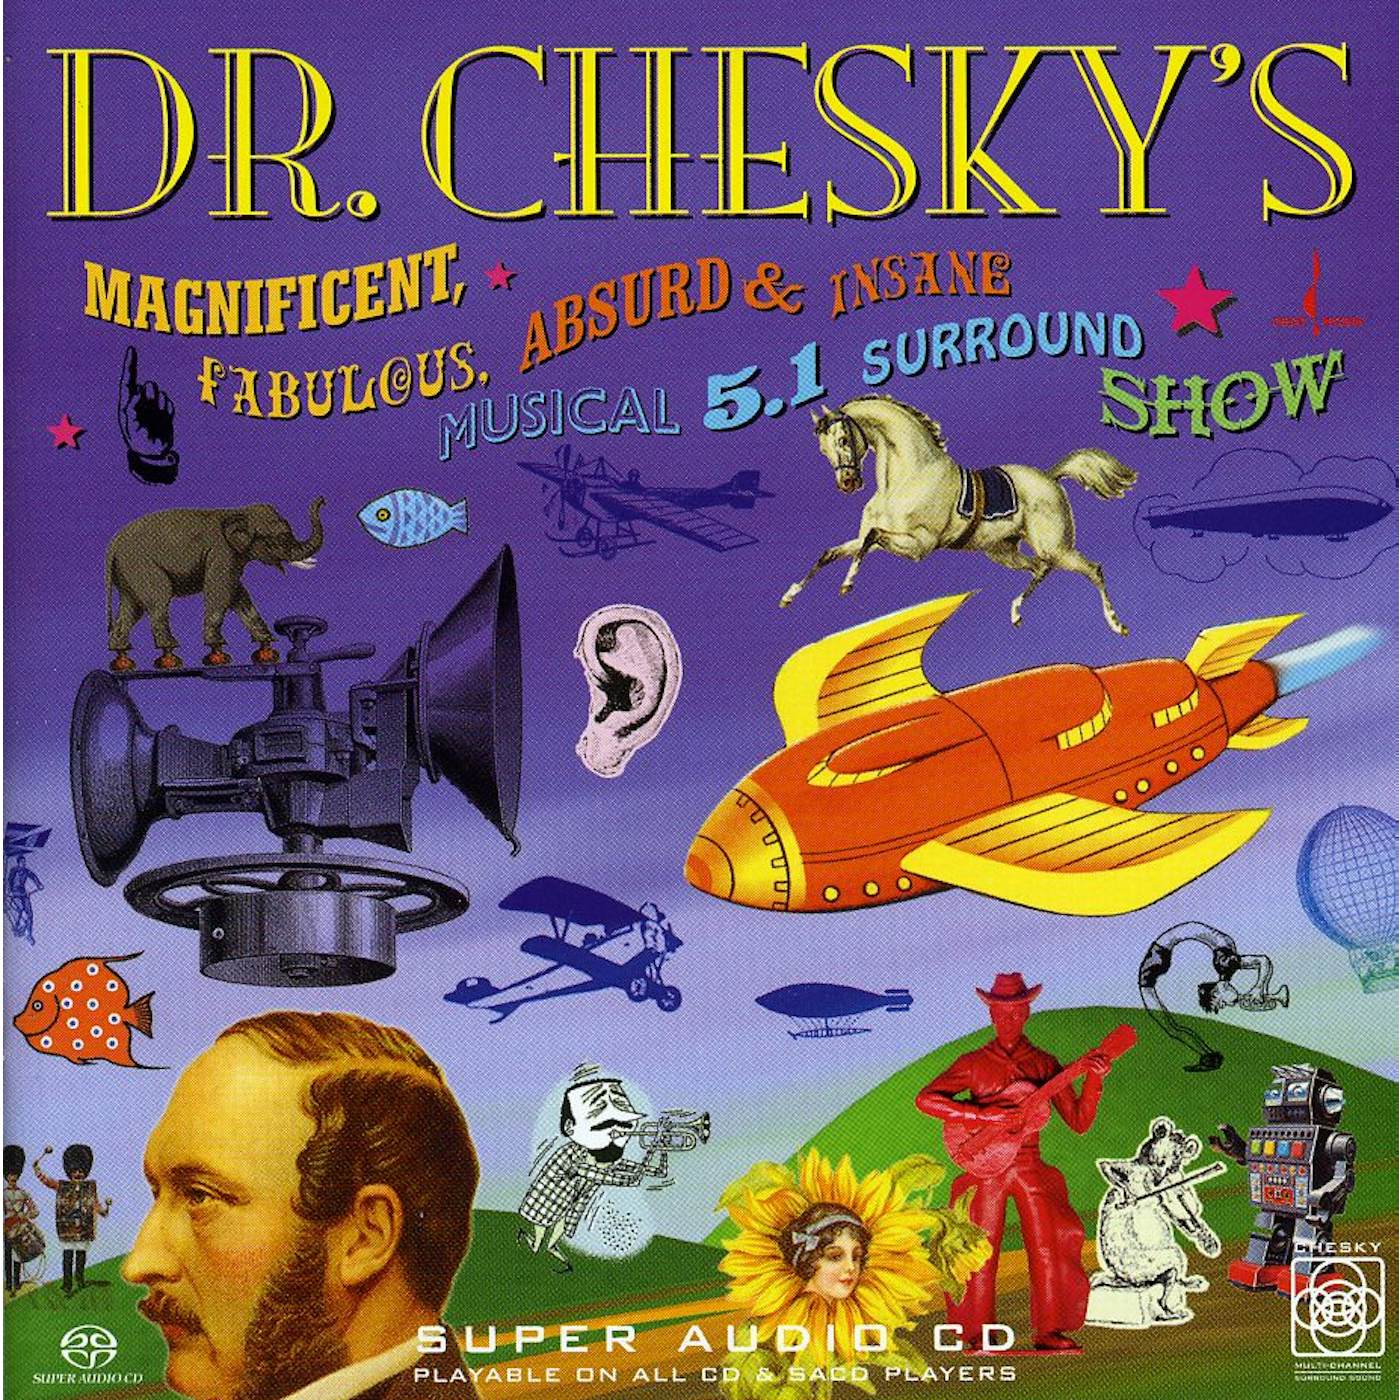 David Chesky DR CHESKY'S MAGNIFICENT FAB ABSURD MUSCAL (HYBRID) Super Audio CD